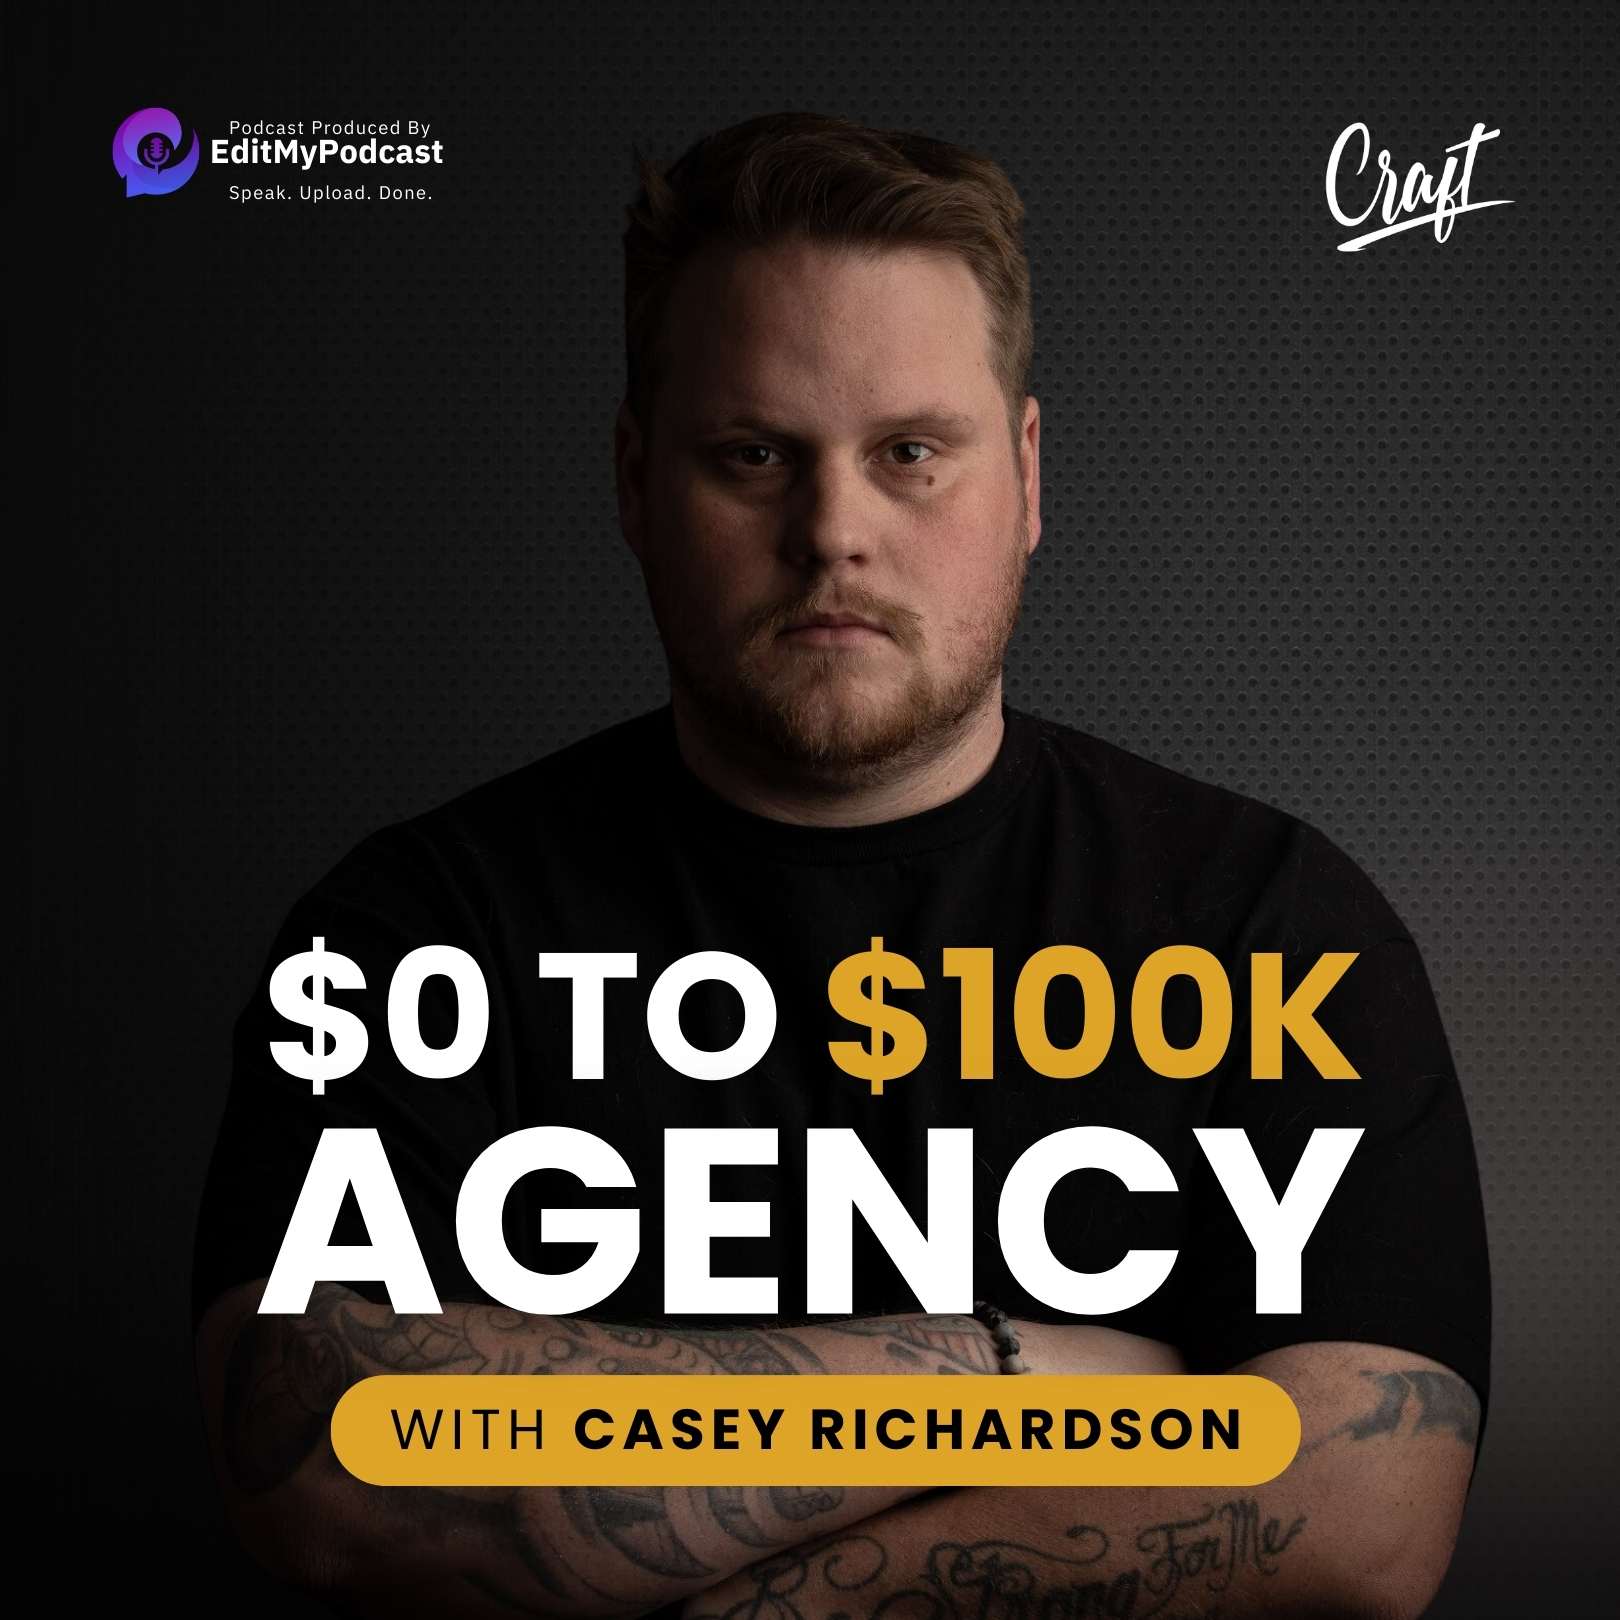 Show artwork for $0 To $100K Agency - Offering 1 Service Scaled To $100k Monthly Recurring Revenue